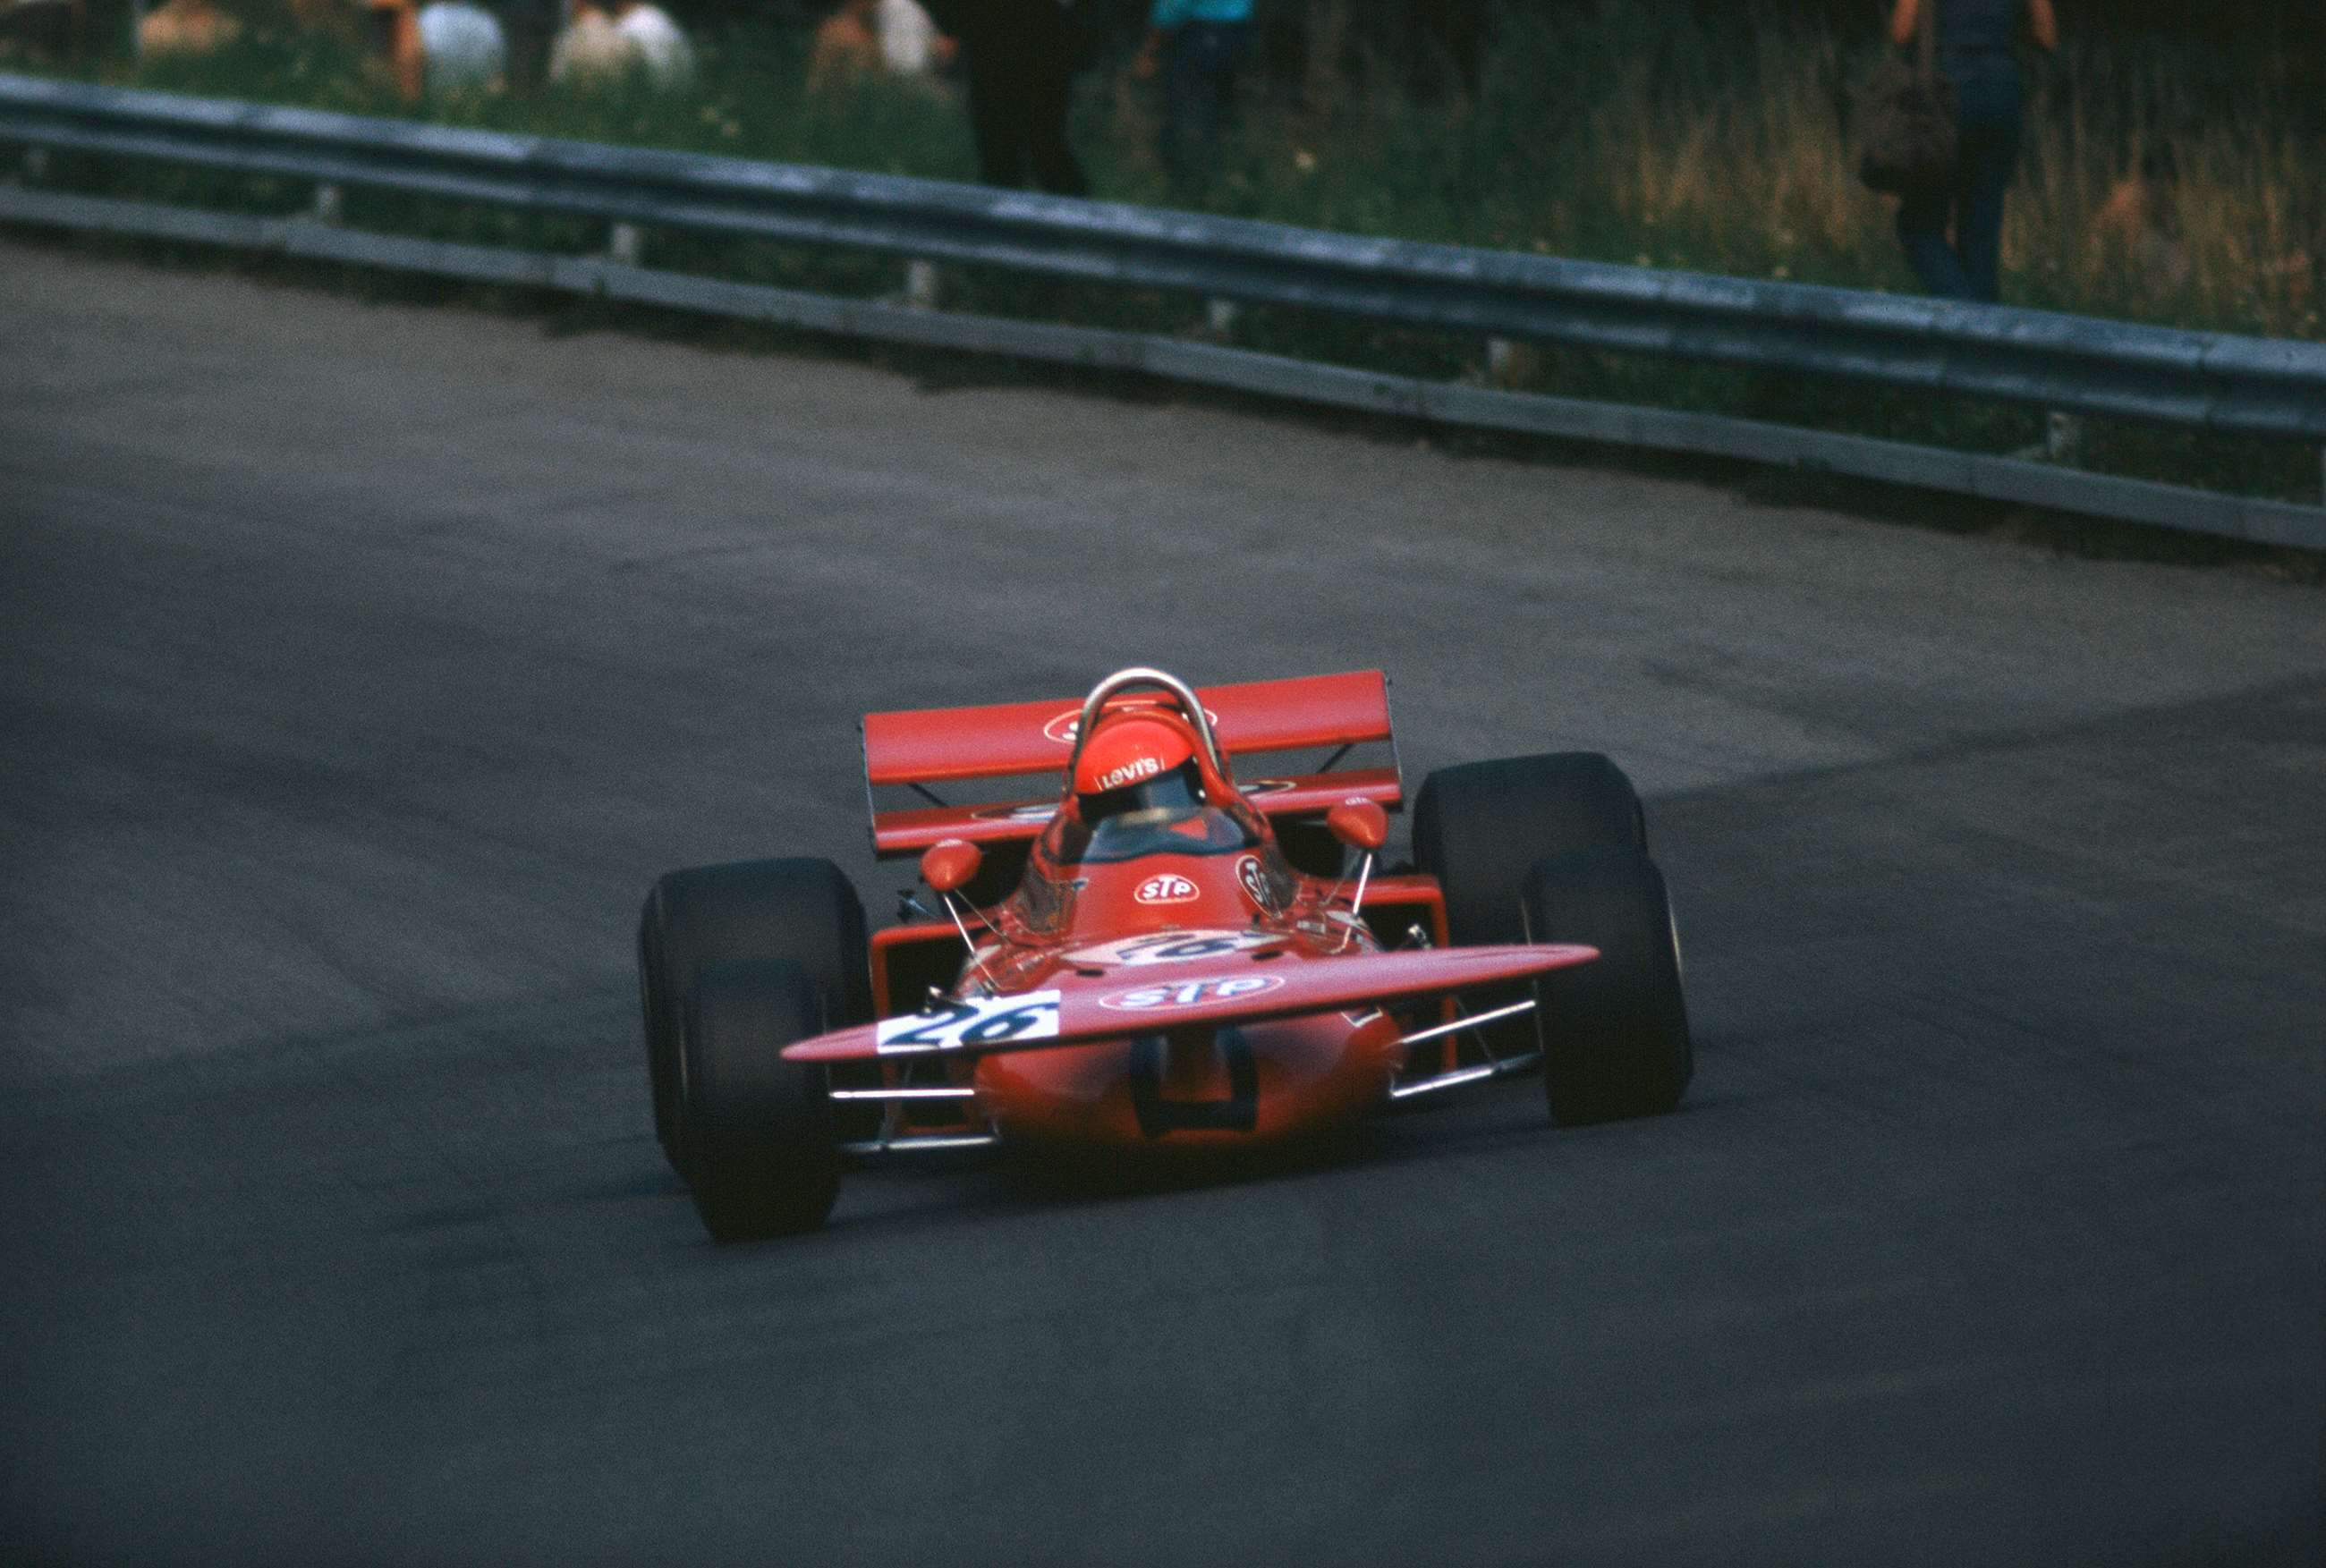 Lauda making his F1 debut at the wheel of the March 711 Ford. 